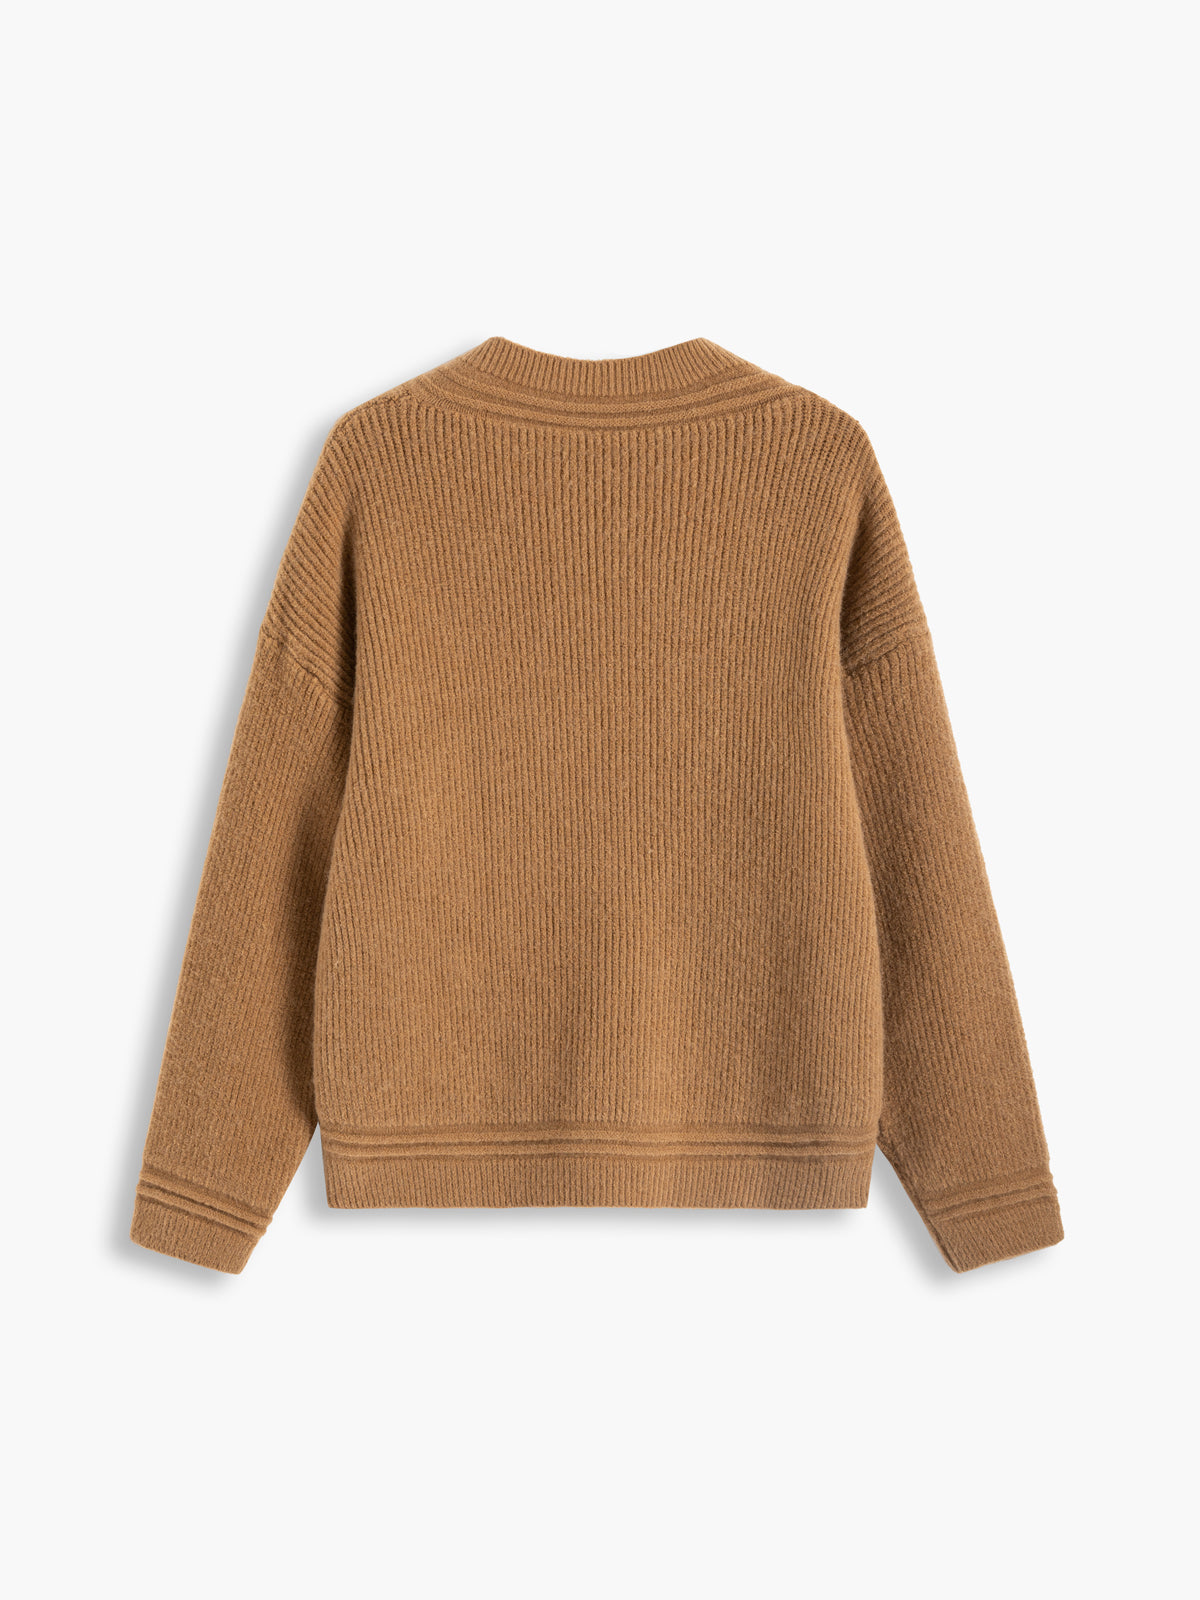 End Of The Road Sweater